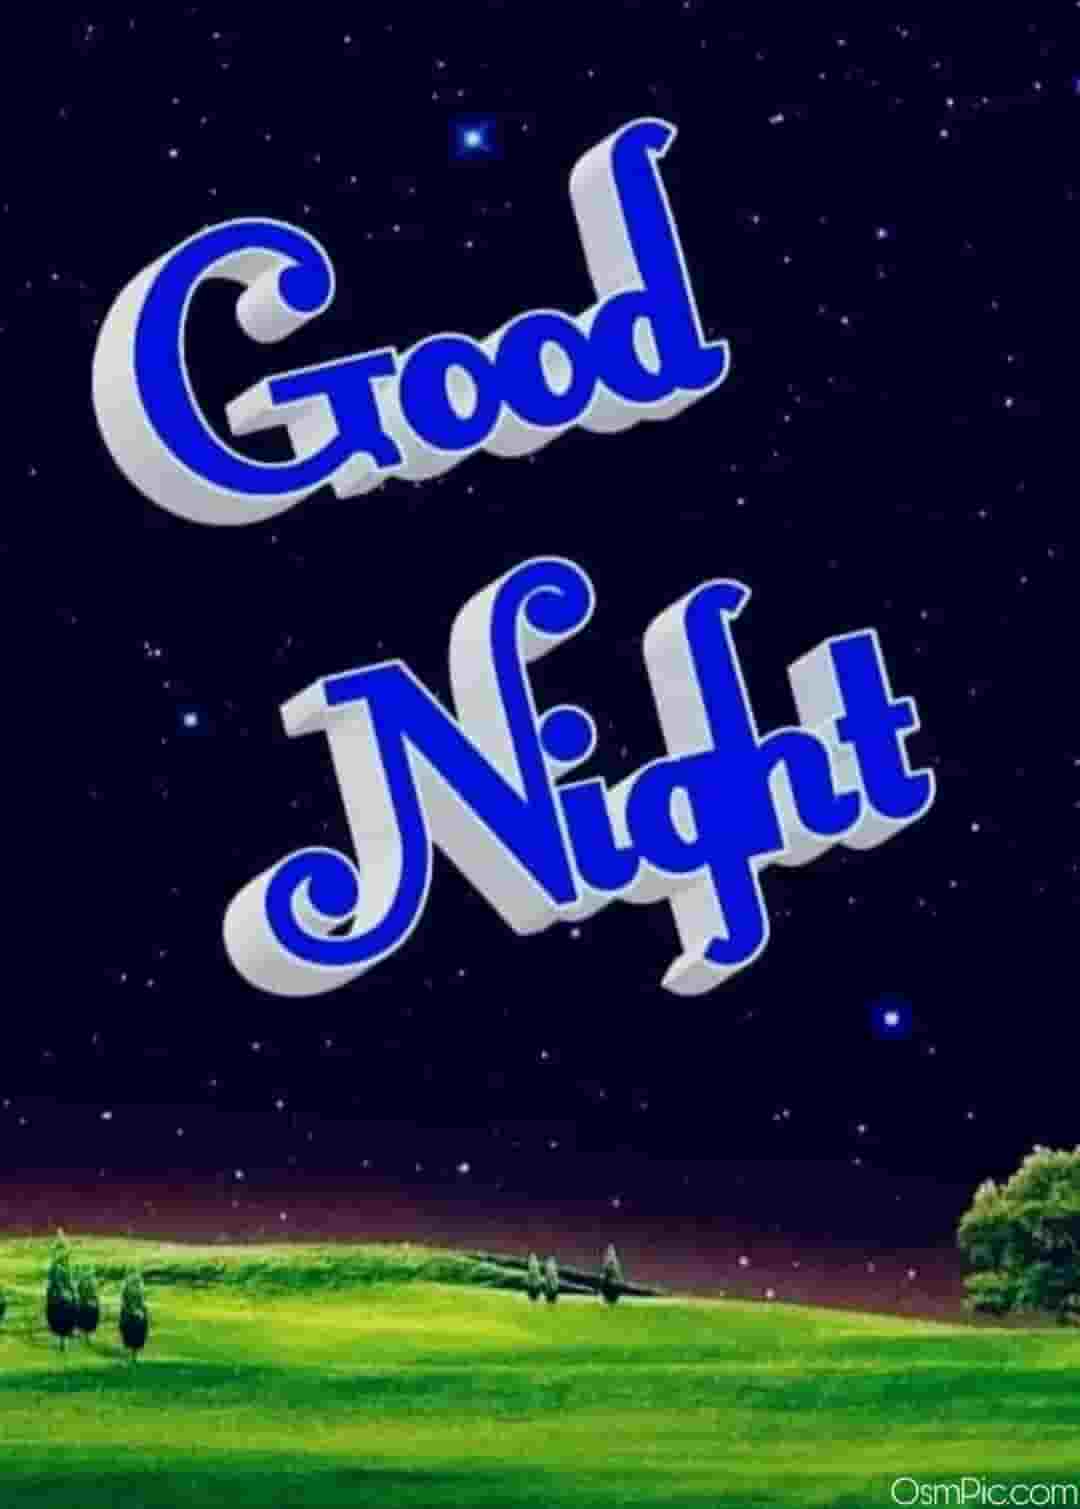 New Good Night Images, Photos Free Download For WhatsApp Friends